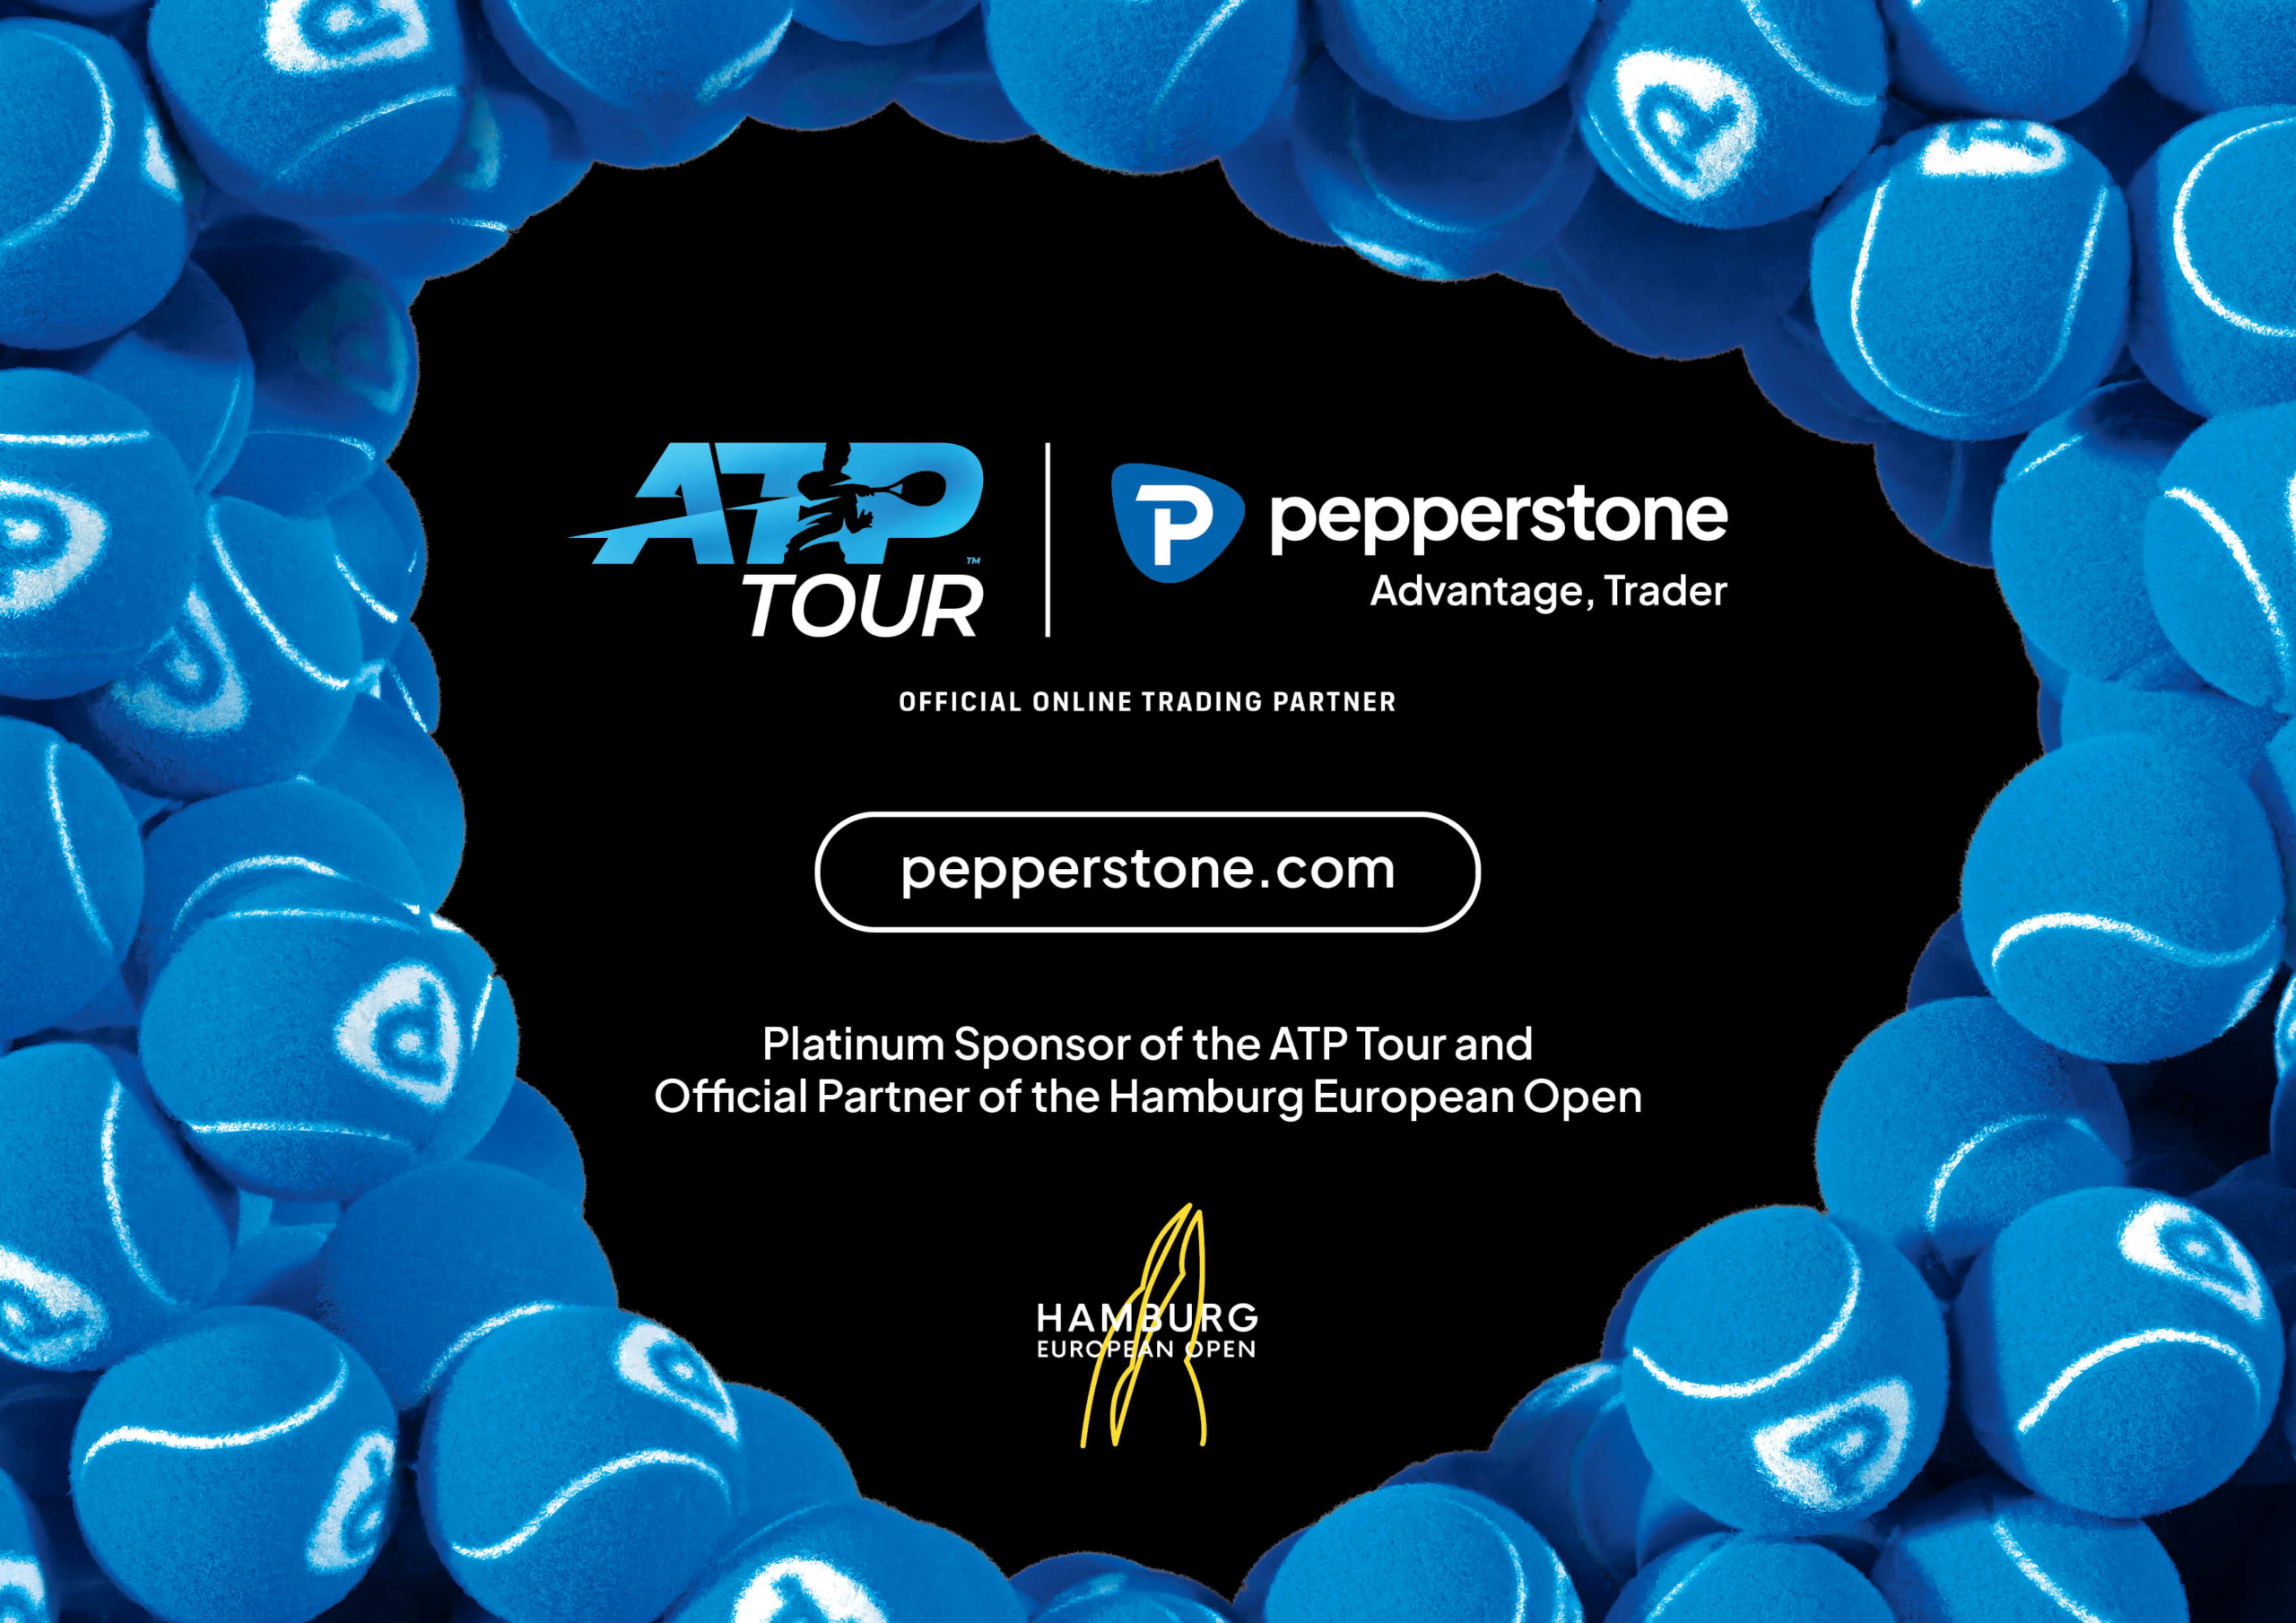 ATP & Pepperstone Launch Global Partnership, Live Rankings - iSportConnect